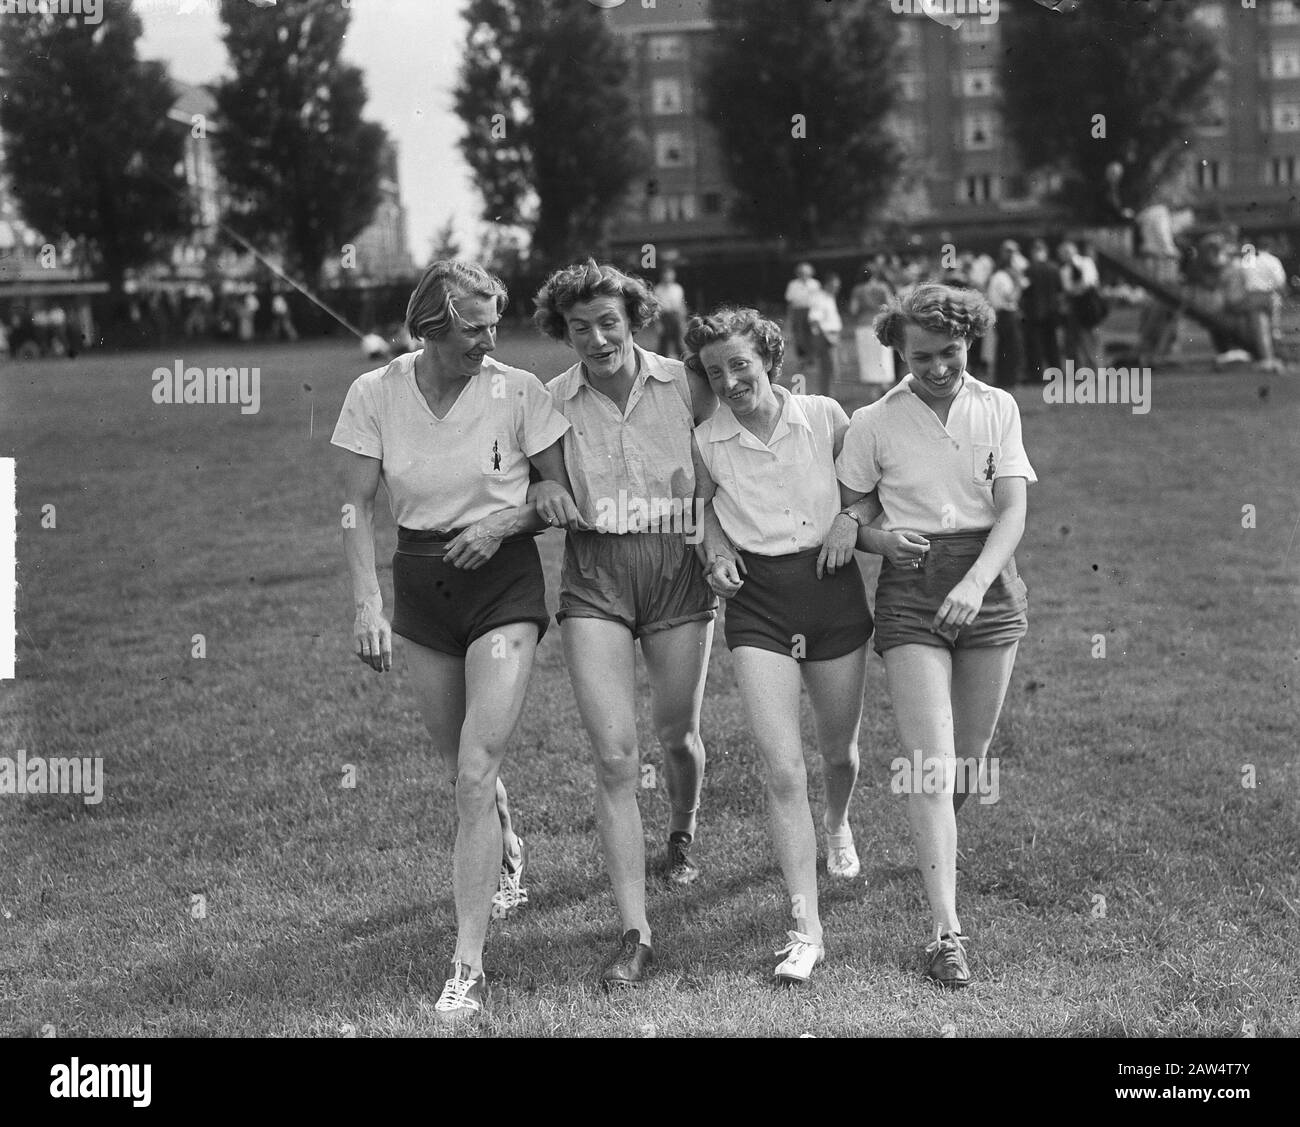 Record 4 x 100 meter relay of A. V. Sagitta during Dutch Championships, from right to left Nel Büch, Ina van Vooren, Gre de Jongh and FBK [picture is reversed!] Date: August 6, 1950 Keywords: athletes, athletics, group portraits, sports Person Name: Blankers-Koen Fanny Ritter Nel De Jongh Gre, Vooren Ina Stock Photo